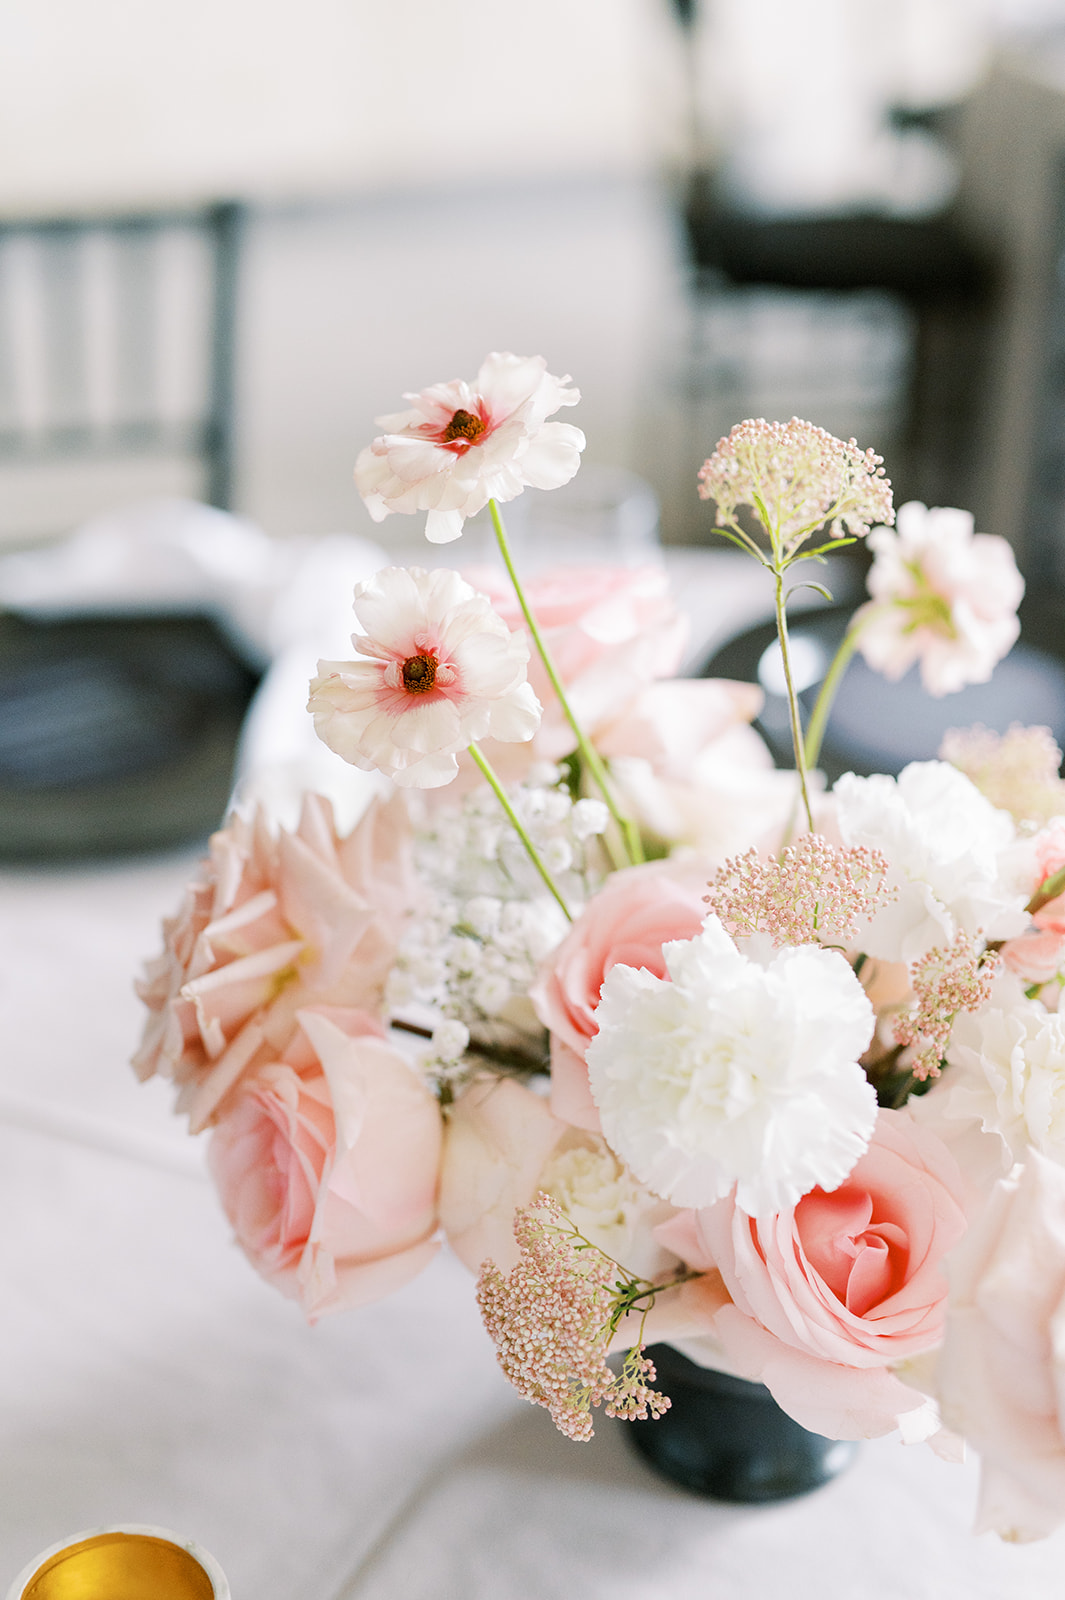 light pink and white centerpiece with black compote